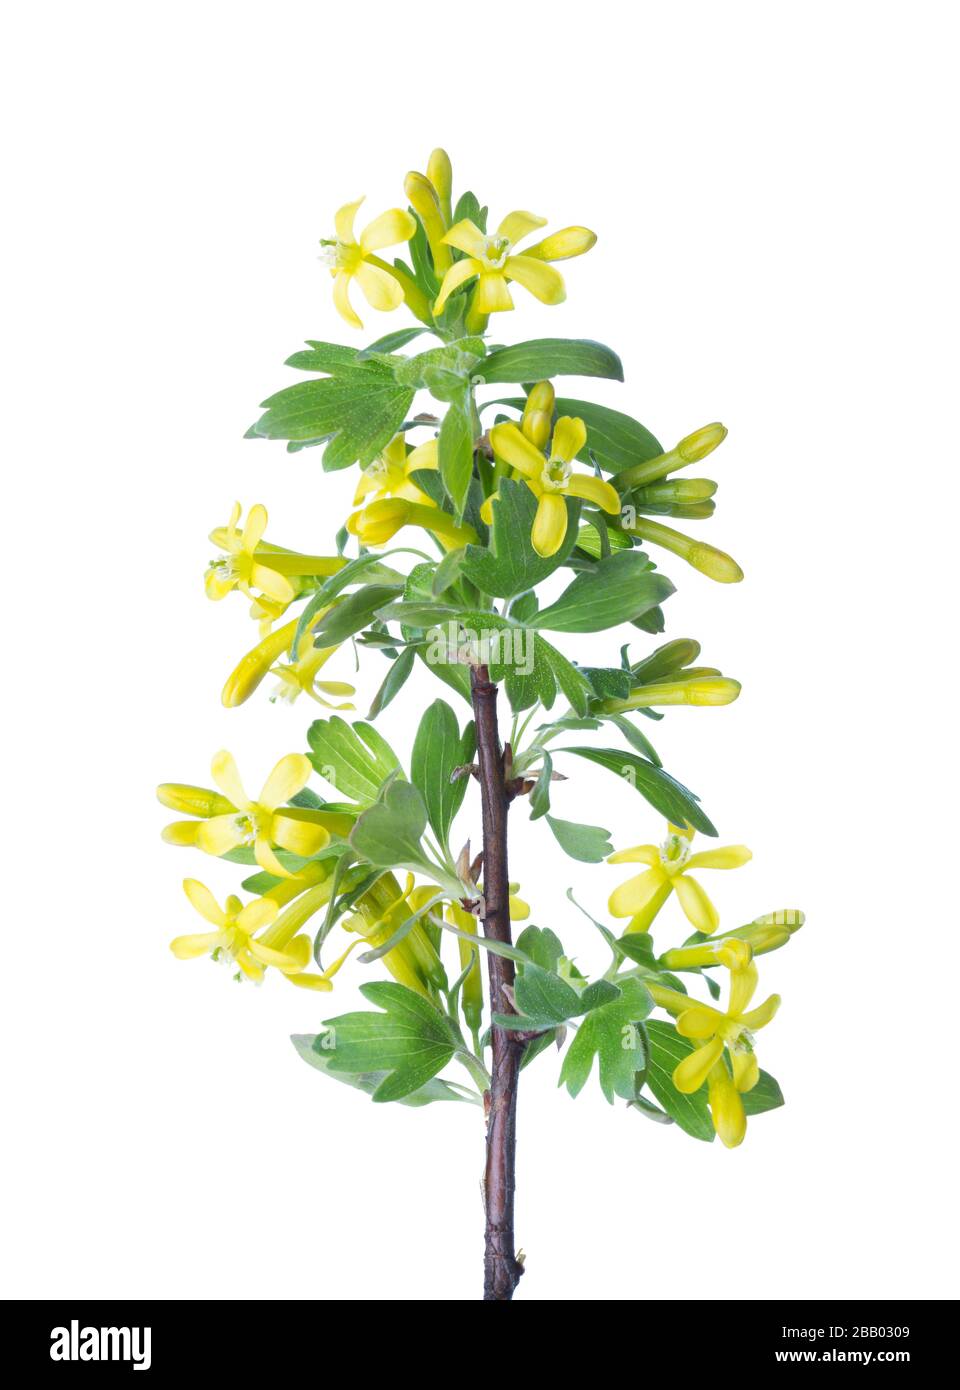 Branch with young green spring leaves and yellow flowers isolated on white. Golden Currant Stock Photo